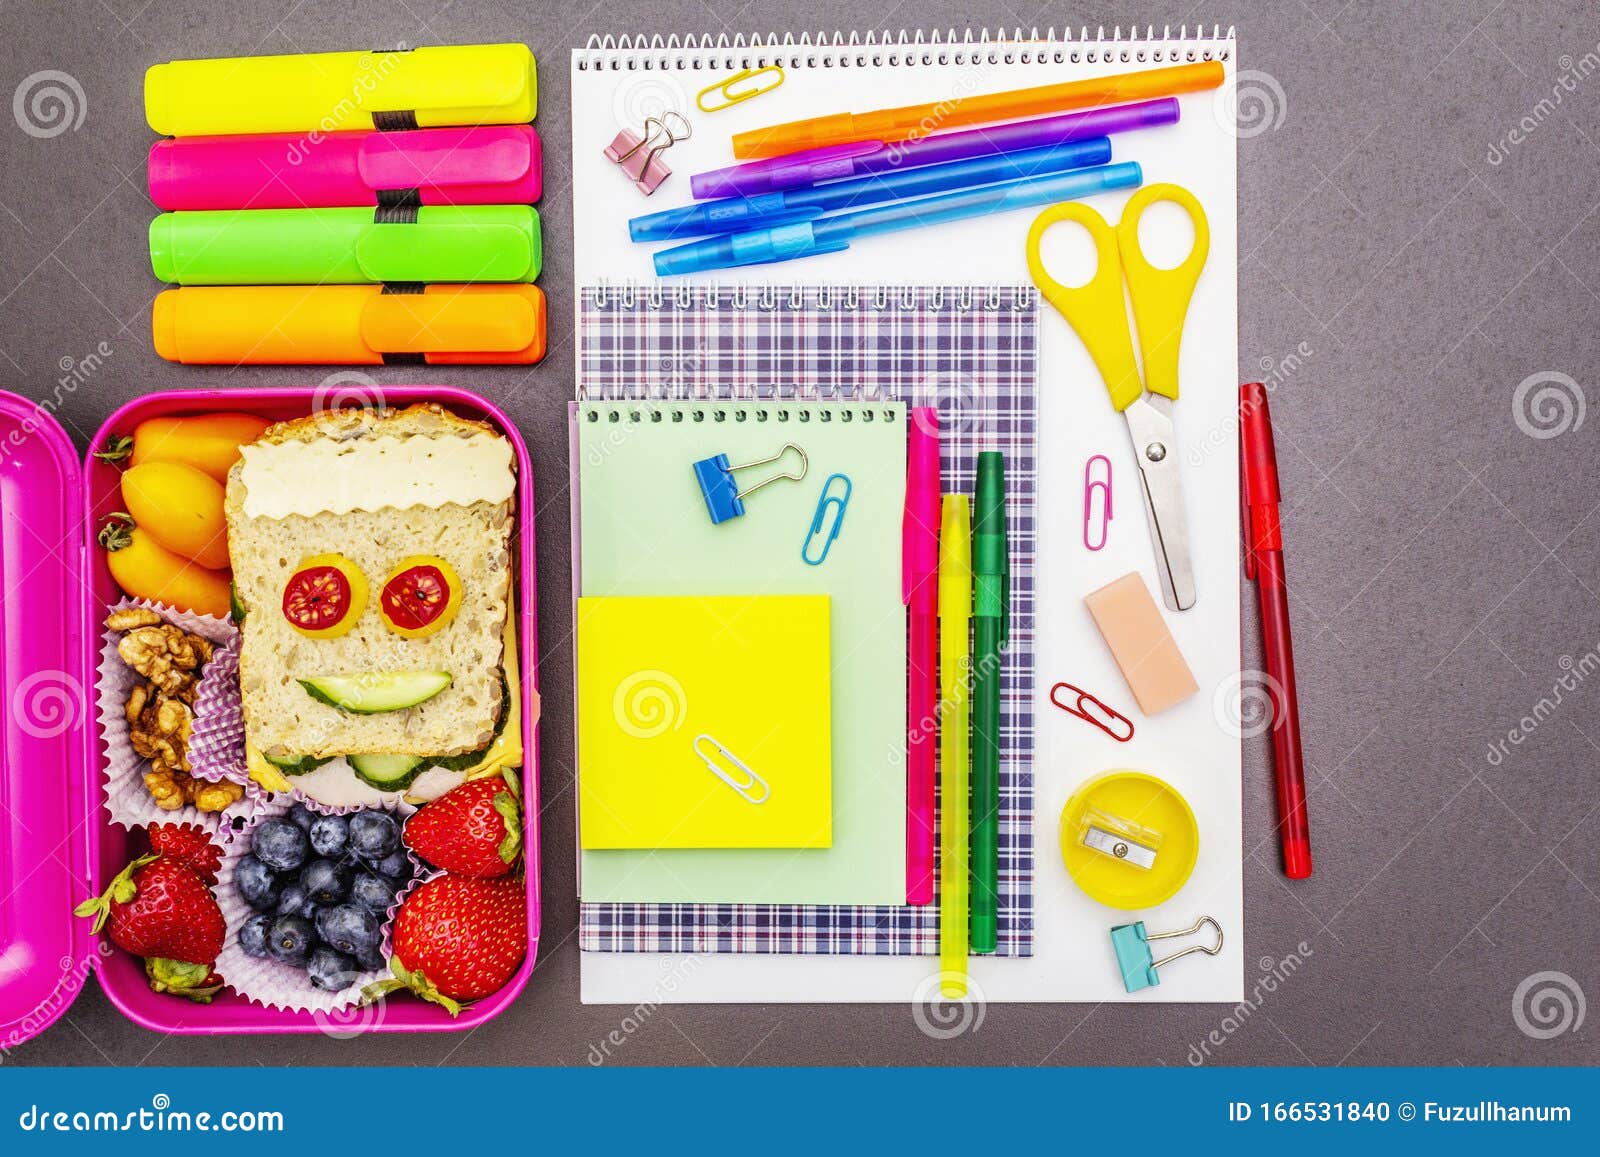 School supplies and lunch box with sandwich and vegetables. Back